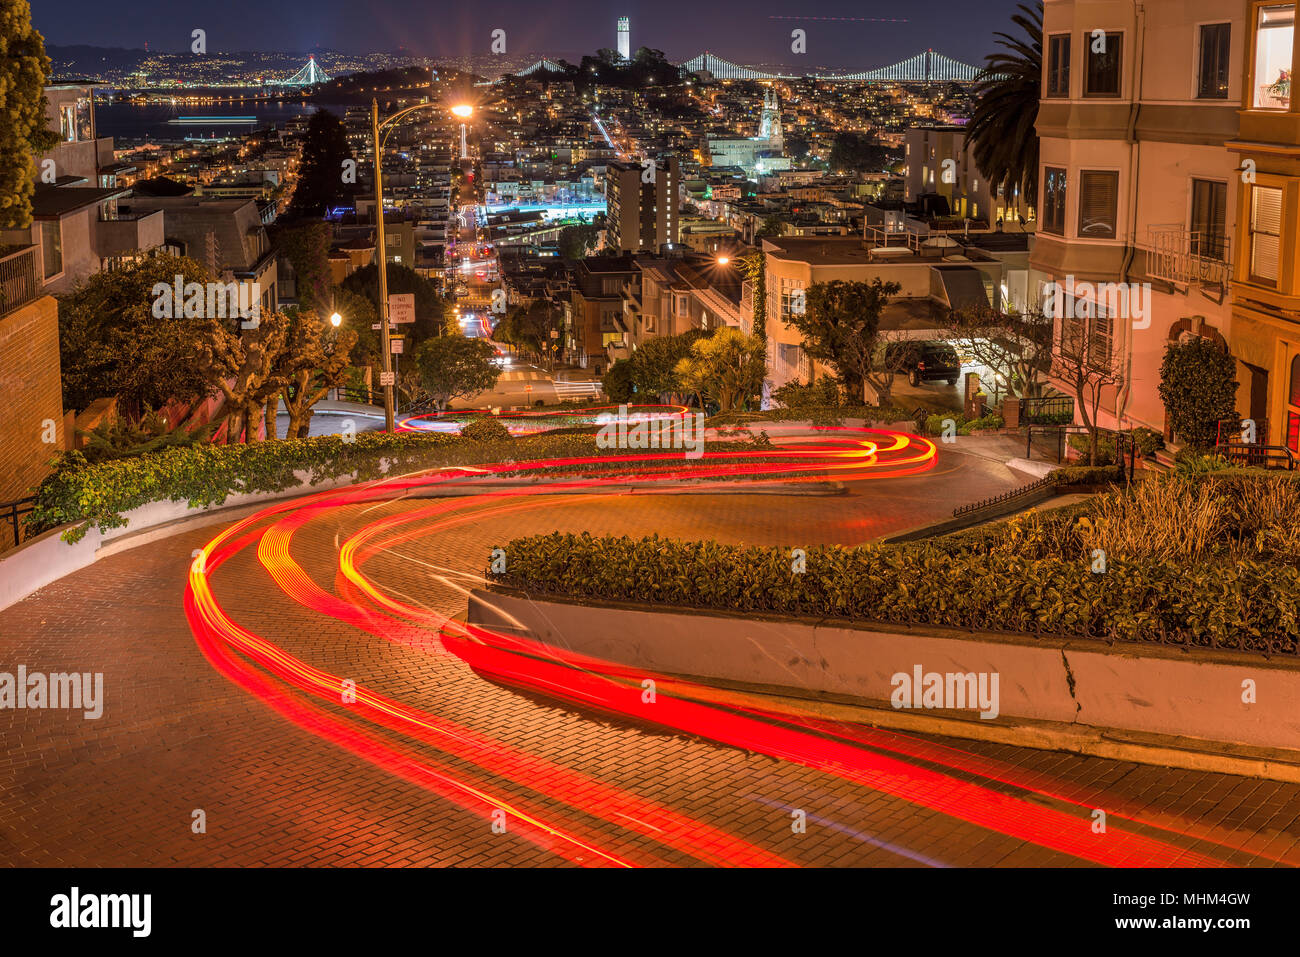 Crookedest Street at Night - Night panoramic view of Lombard Street, the steepest and crookedest street, and city neighborhoods, San Francisco, CA. Stock Photo